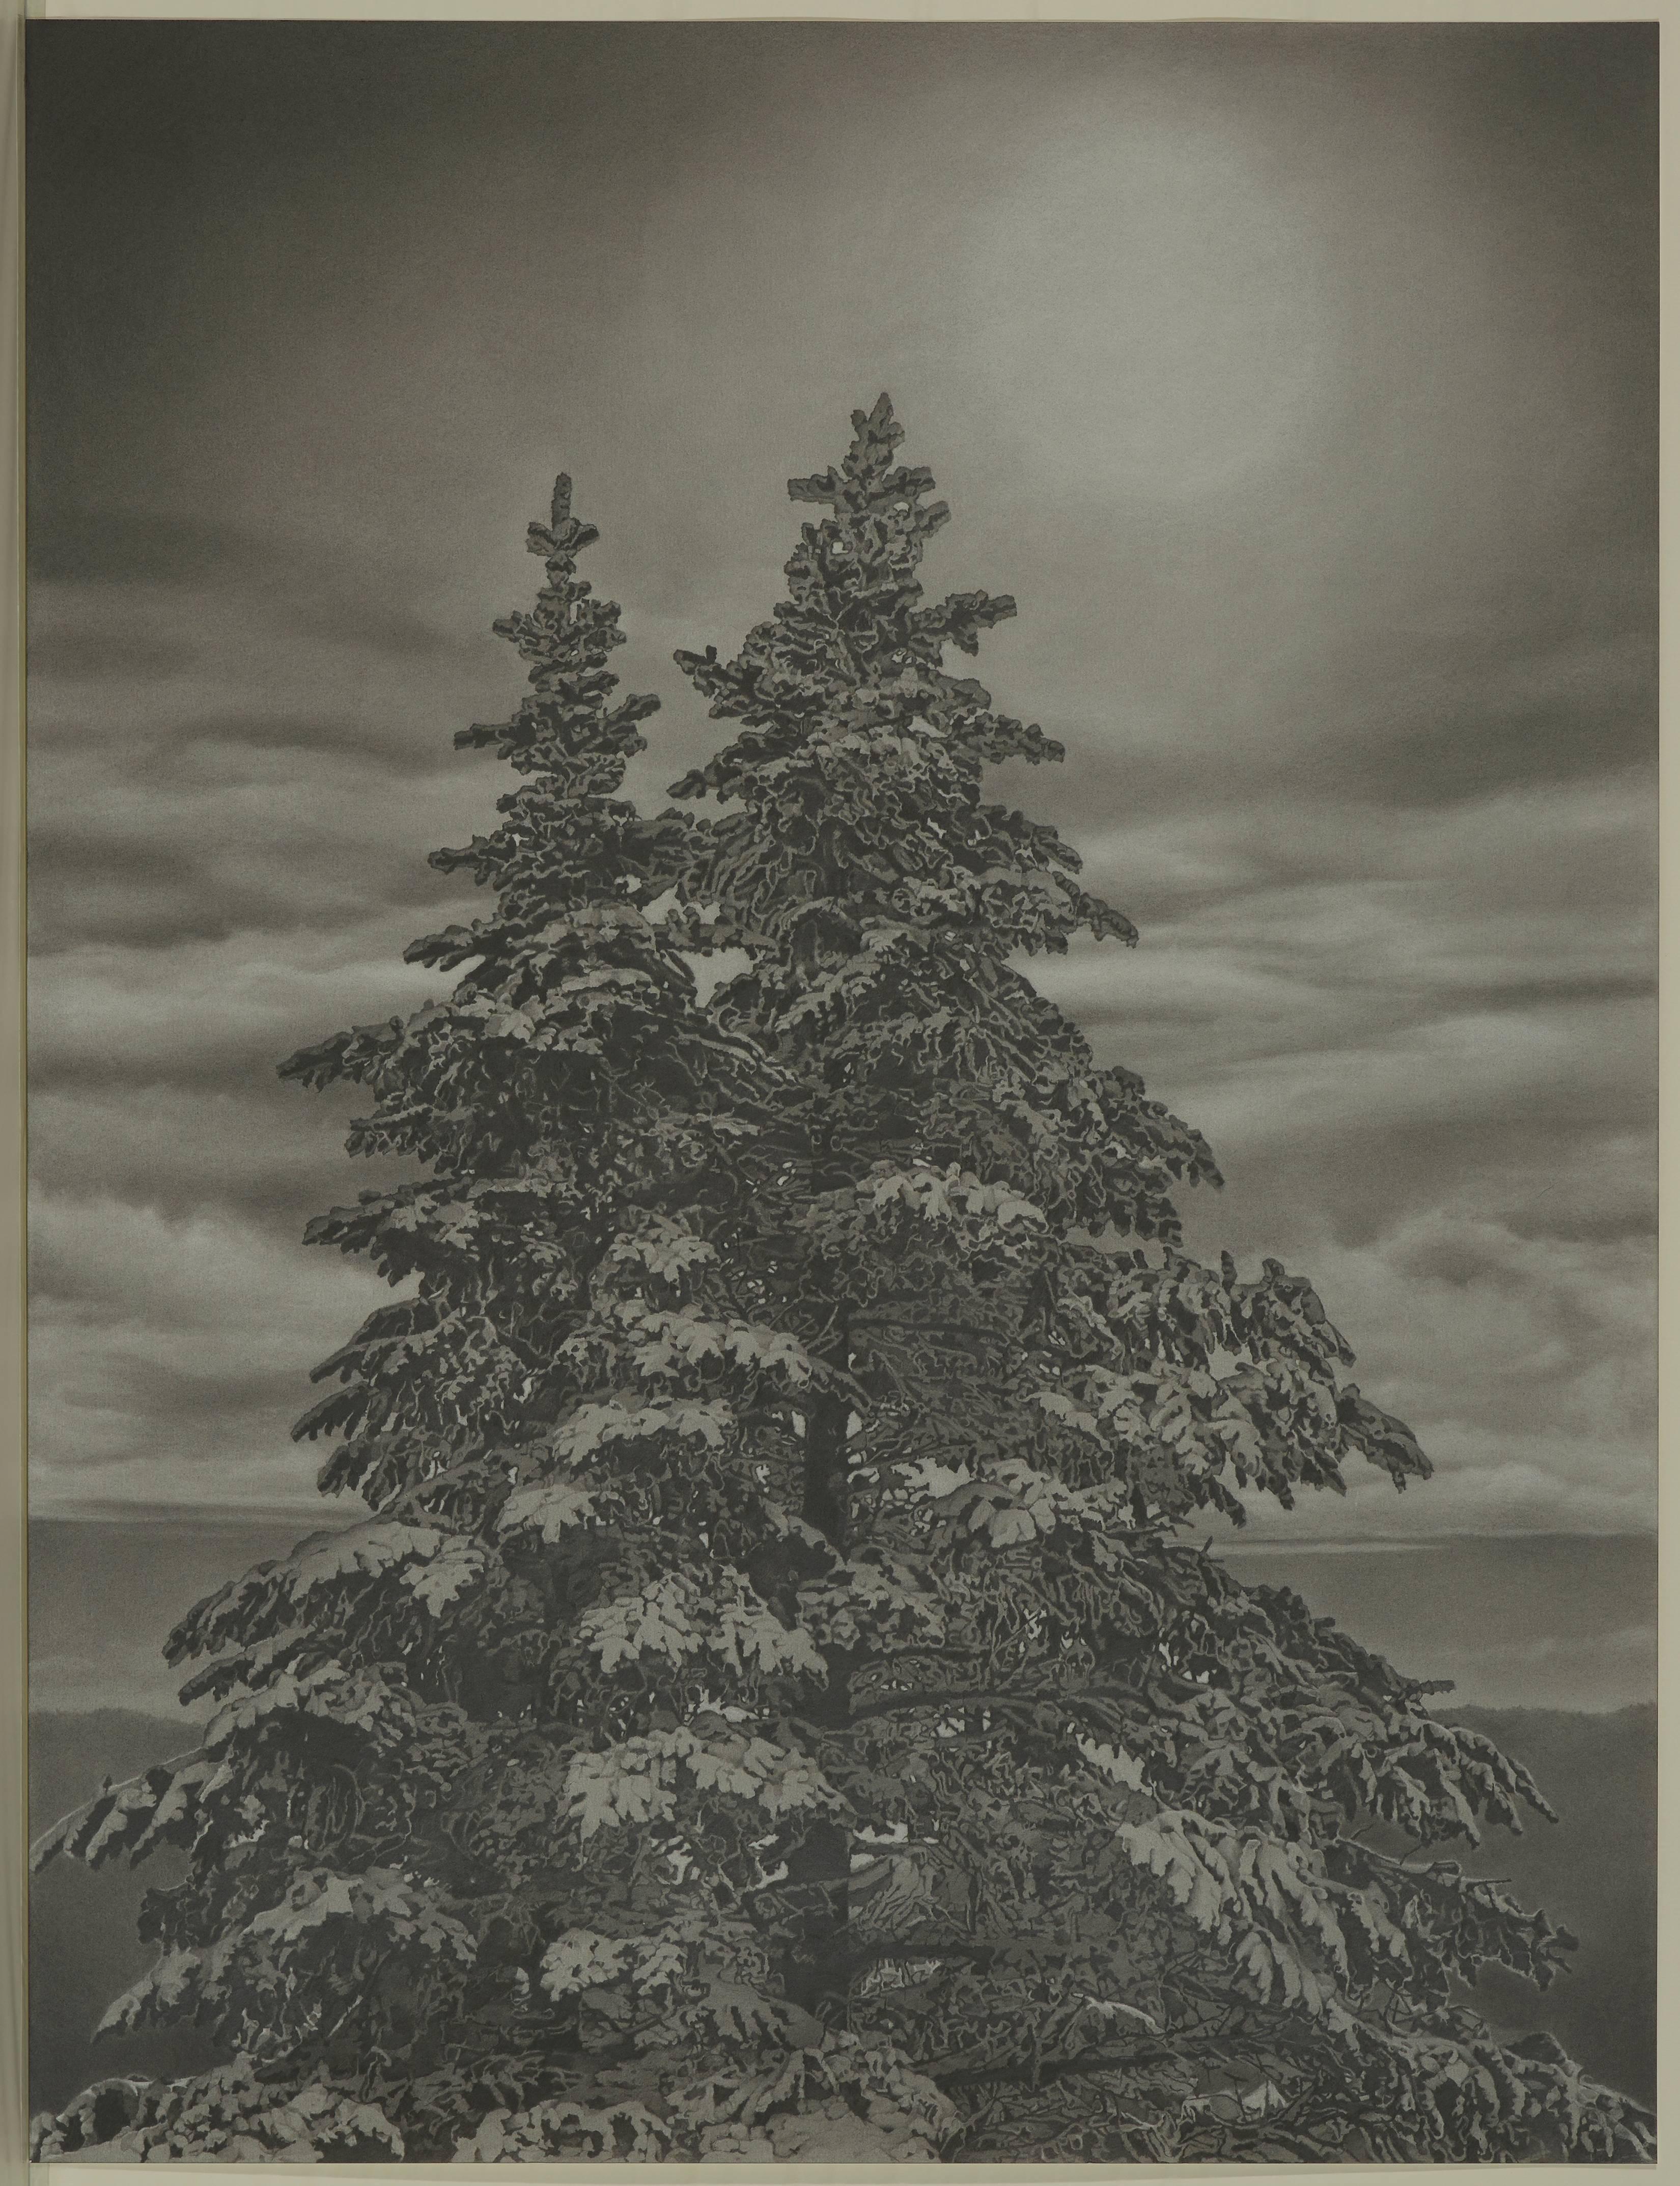 Mary Reilly
Twin Spruce, 2016
Graphite on paper
50 x 38 inches
Framed dimensions: 58 x 46 x 2 inches

Reilly uses a toning technique to endow her graphite works with a smooth, seamless quality. Rather than distinct outlines, her pine needles glide